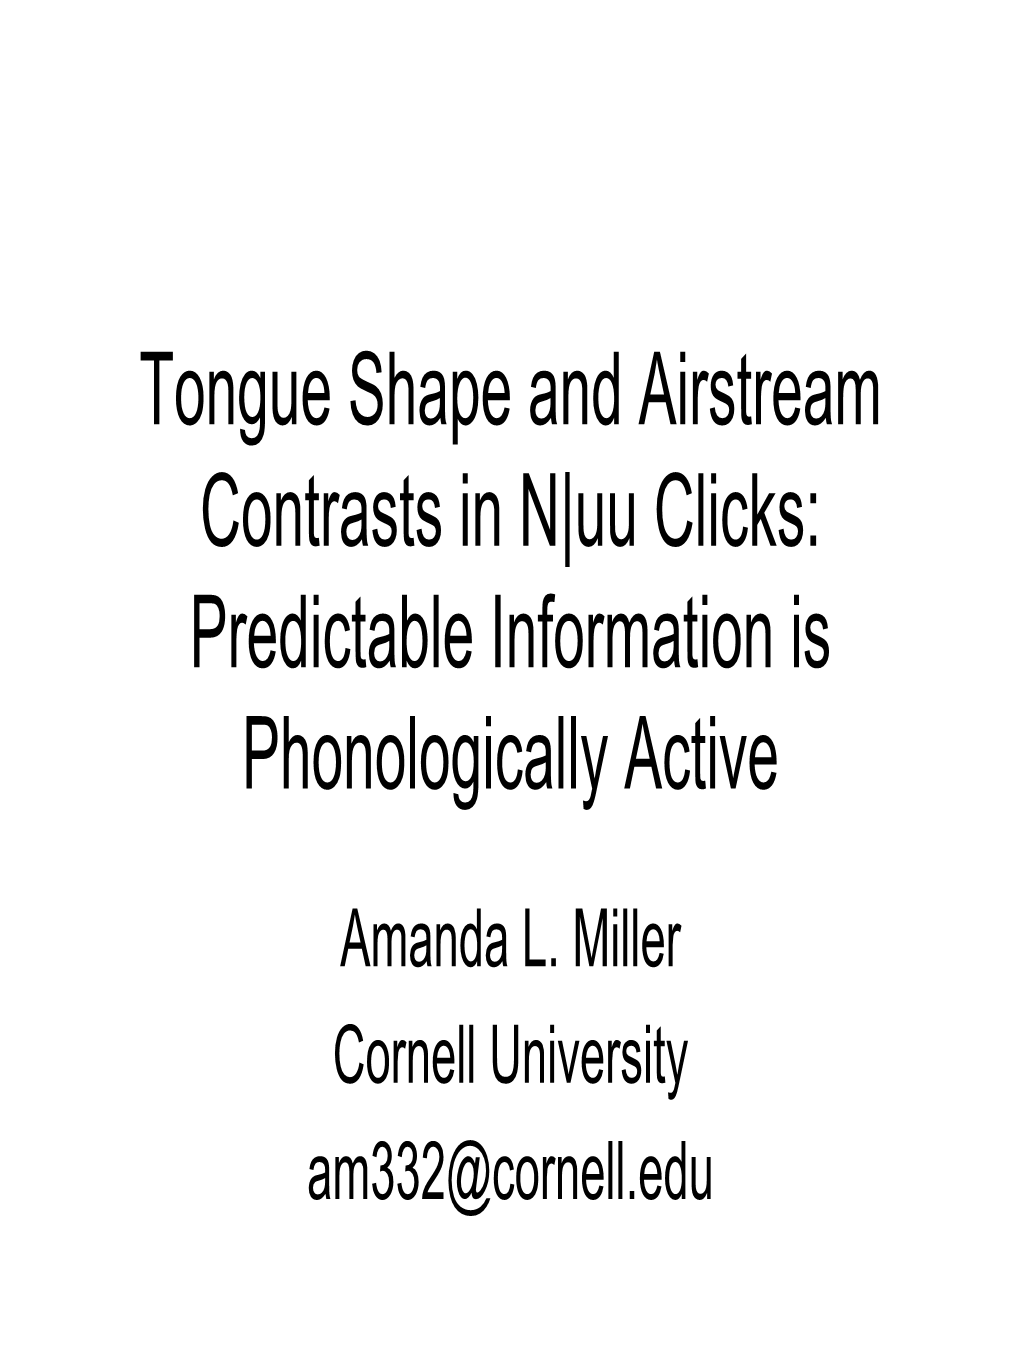 Tongue Shape and Airstream Contrasts in N|Uu Clicks: Predictable Information Is Phonologically Active